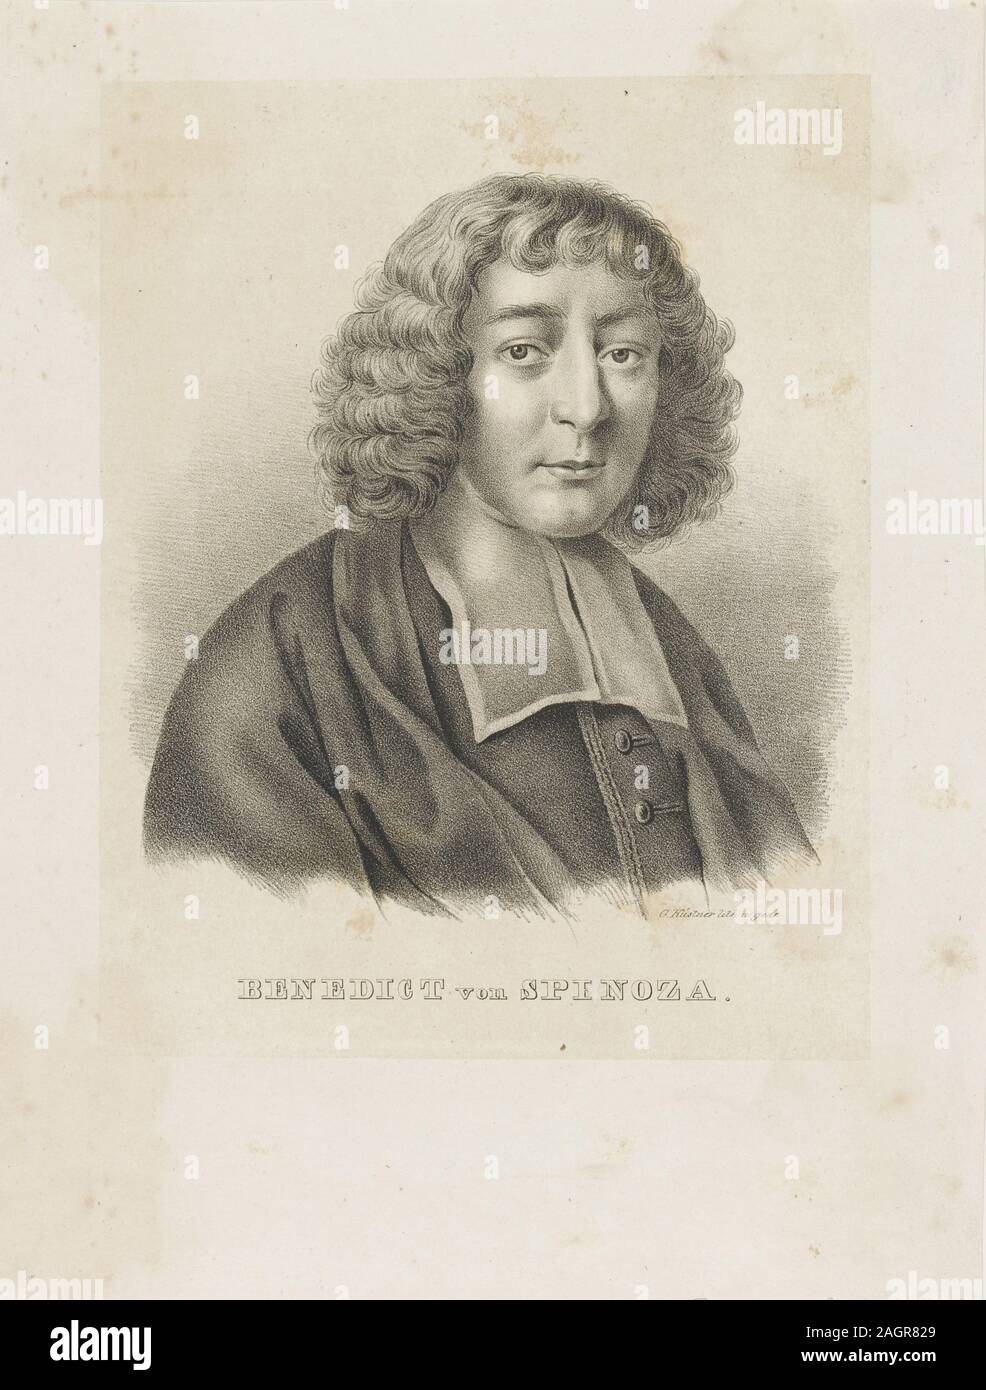 Portrait of Baruch Spinoza. Museum: PRIVATE COLLECTION. Author: GOTTFRIED KÜSTNER. Stock Photo